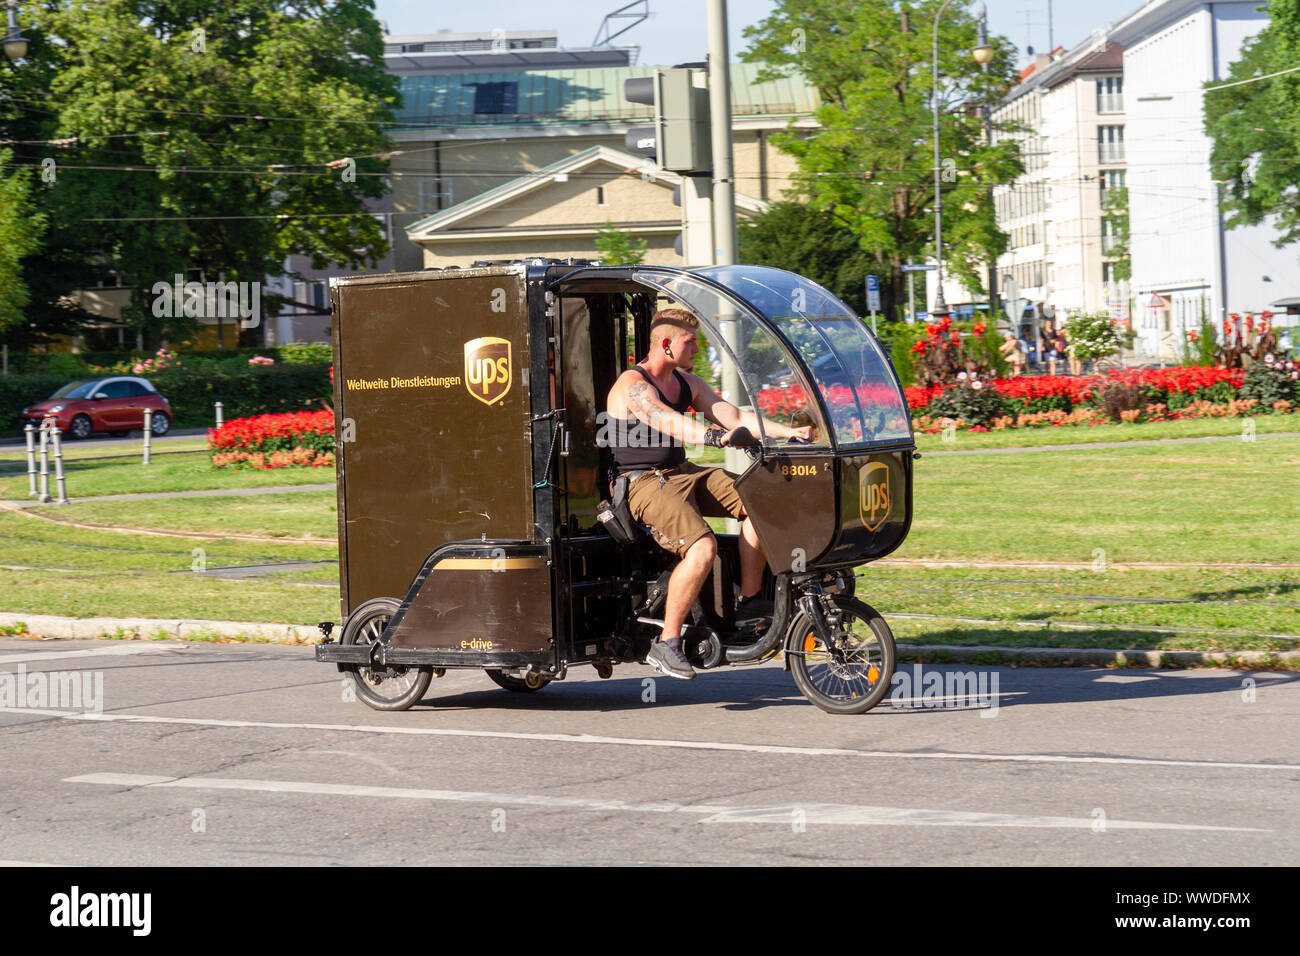 A UPS delivery cargo eBike in Munich, Bavaria, Germany. Stock Photo